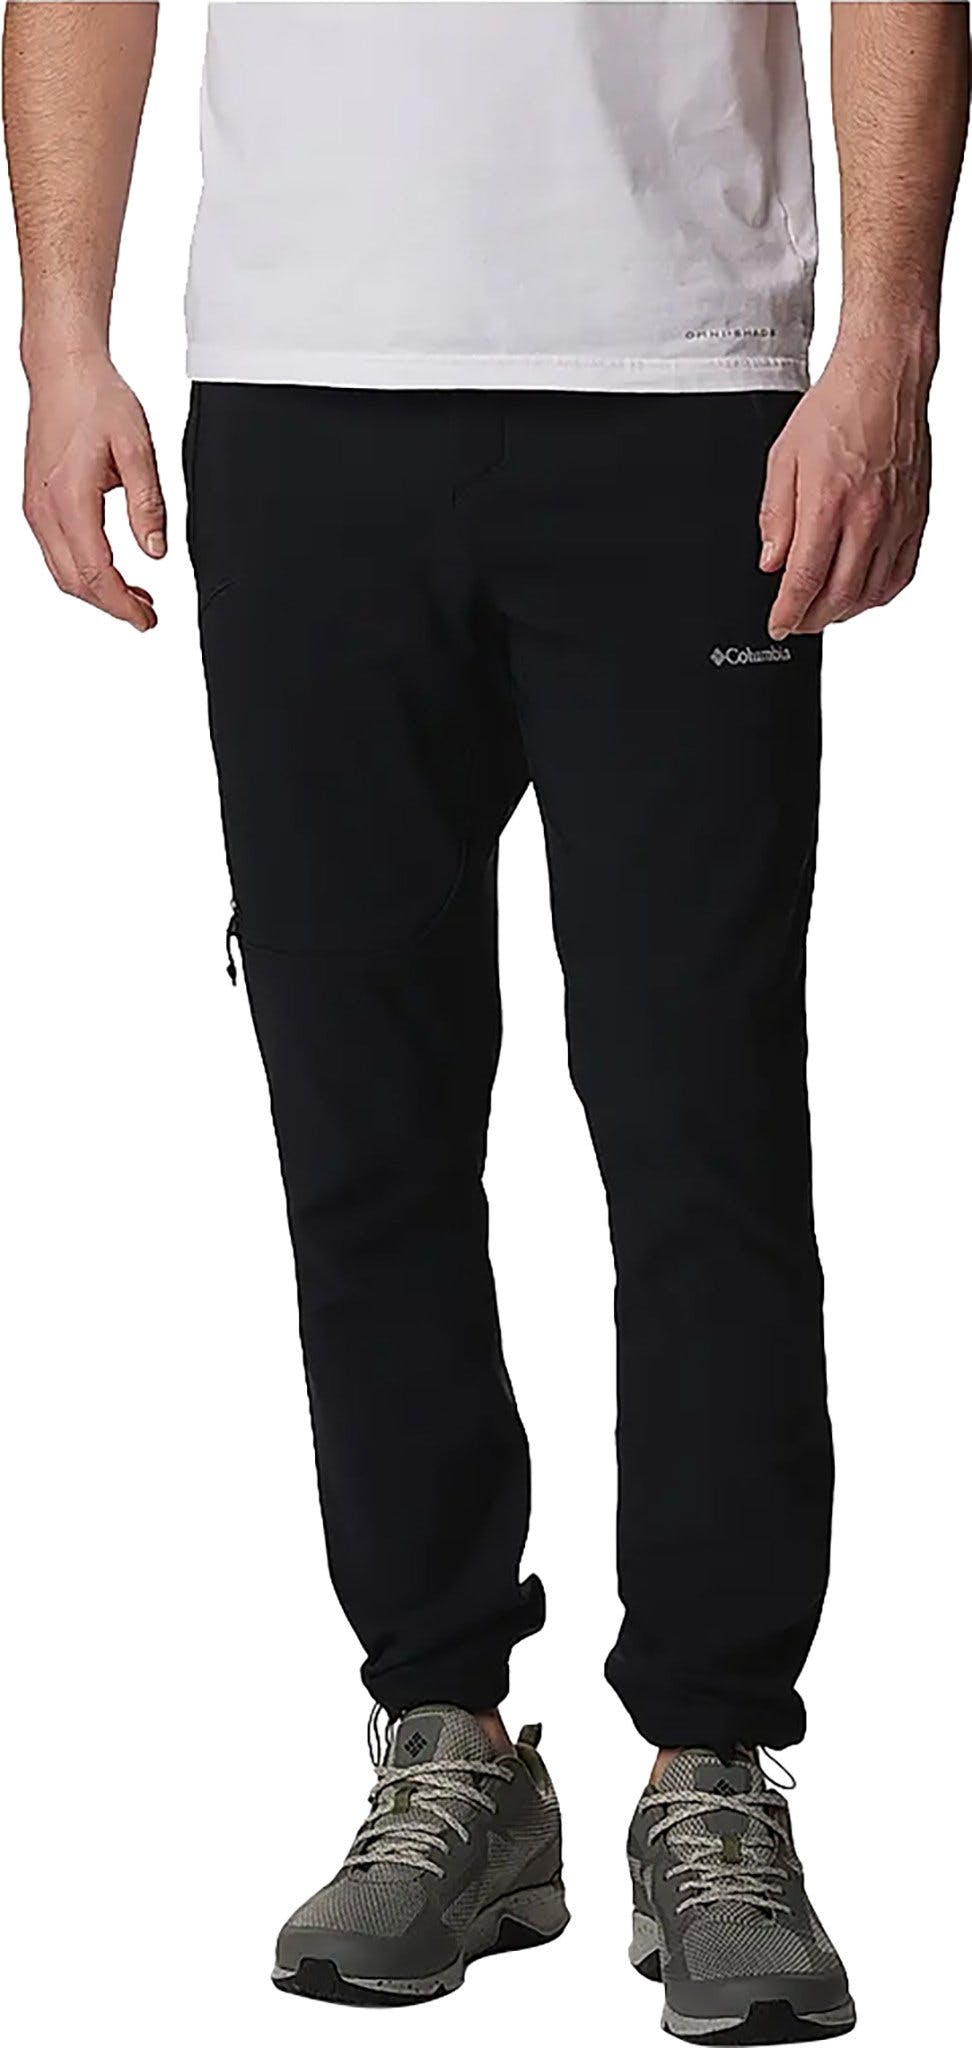 Product image for Triple Canyon II Fall Hiking Pant - Men's